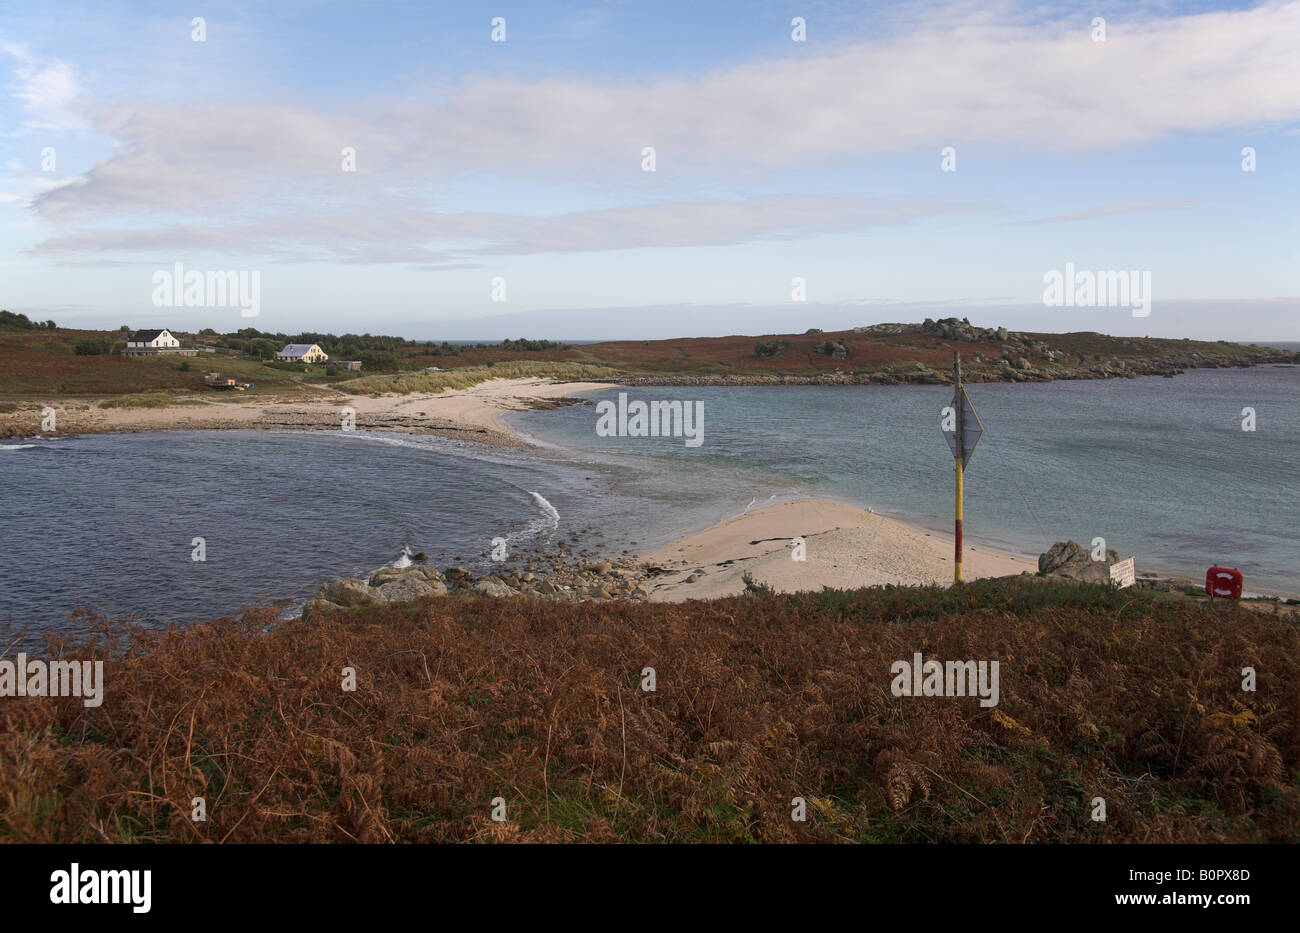 The Island of Gugh viewed from the Scilly Island of St Agnes UK is connected by a tidal causeway called The Bar isles of scilly Stock Photo